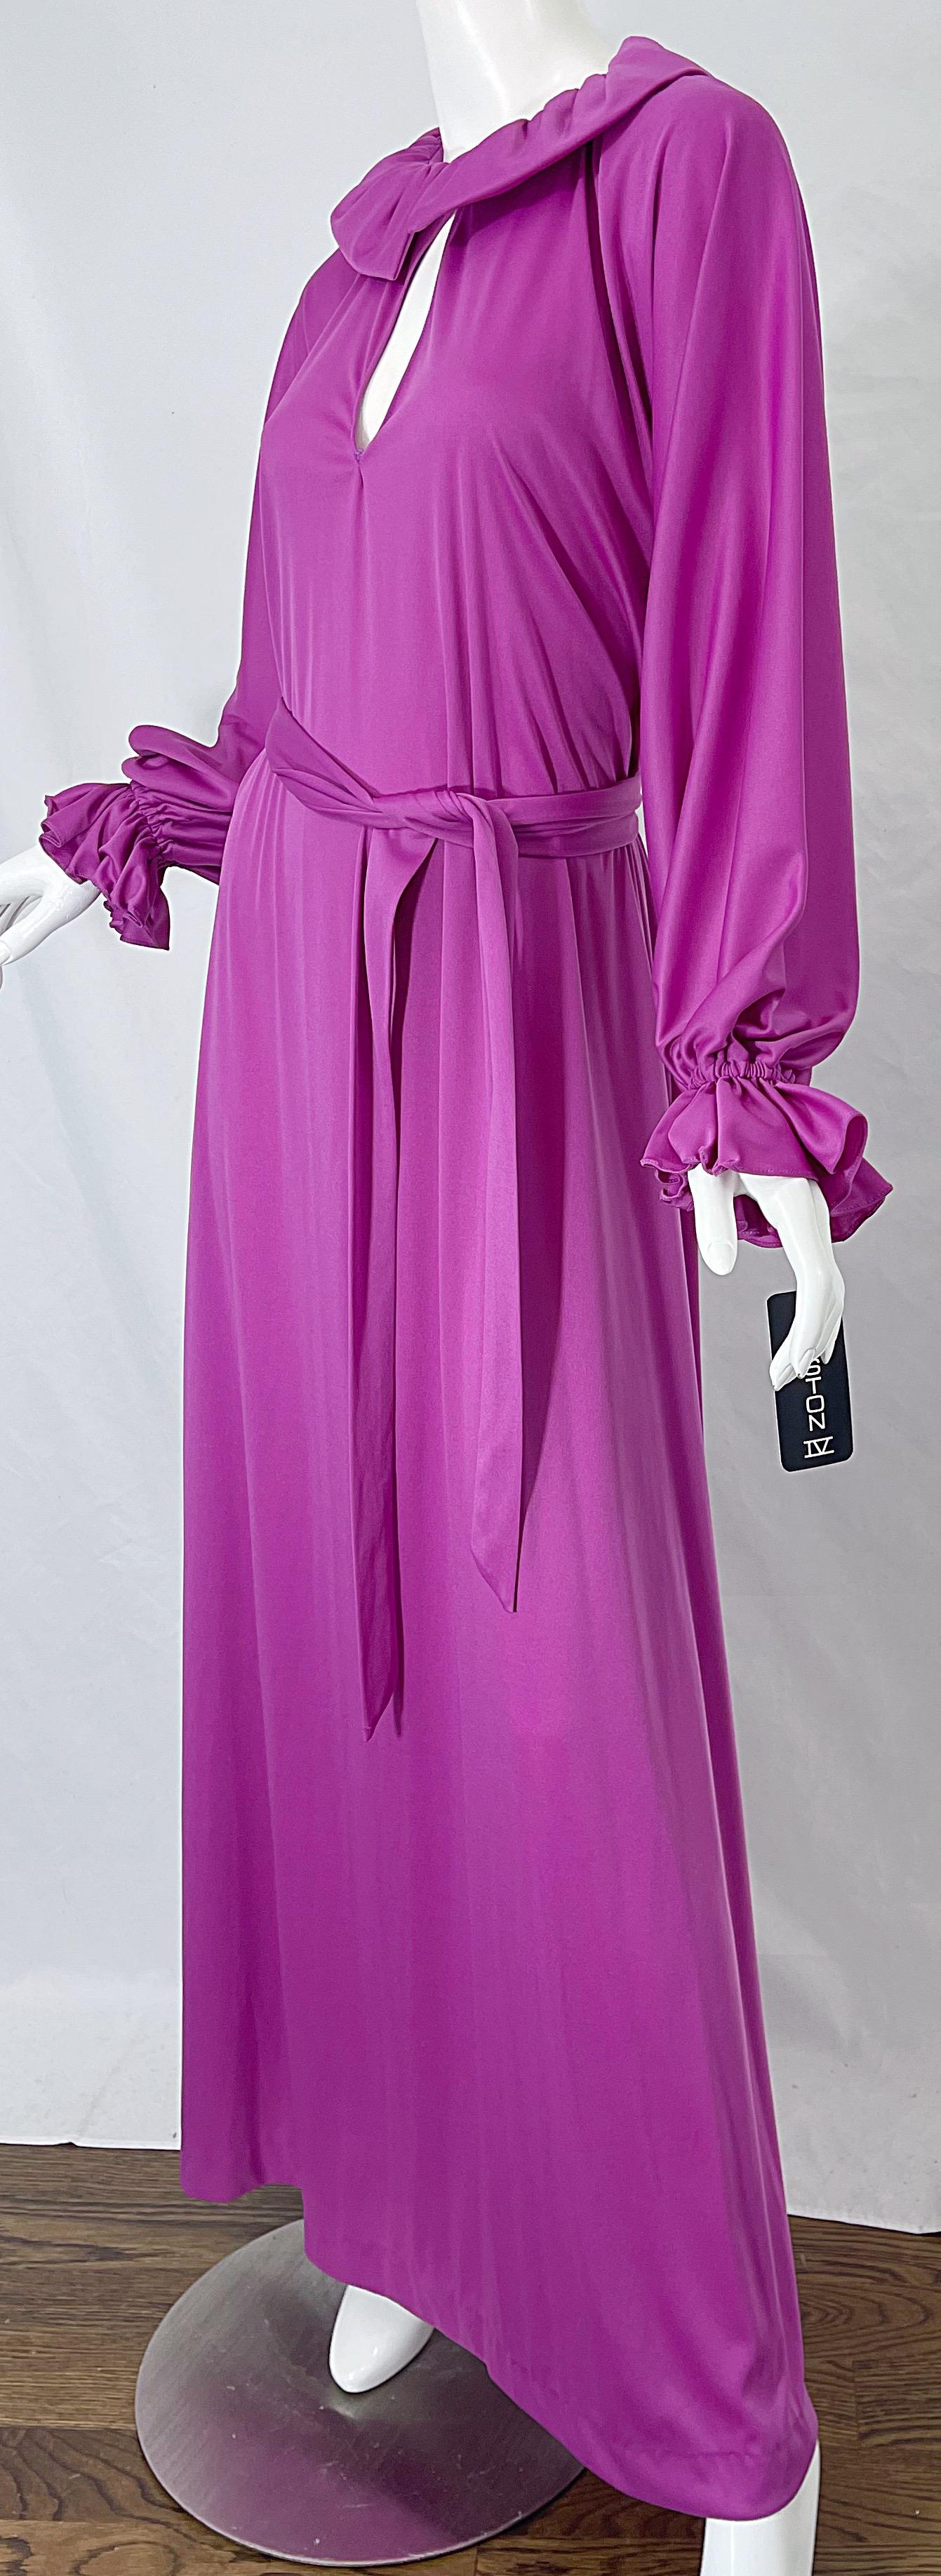 NWT 1970s Halston IV Purple / Pink One Size Fits All Vintage 70s Maxi Dress For Sale 10